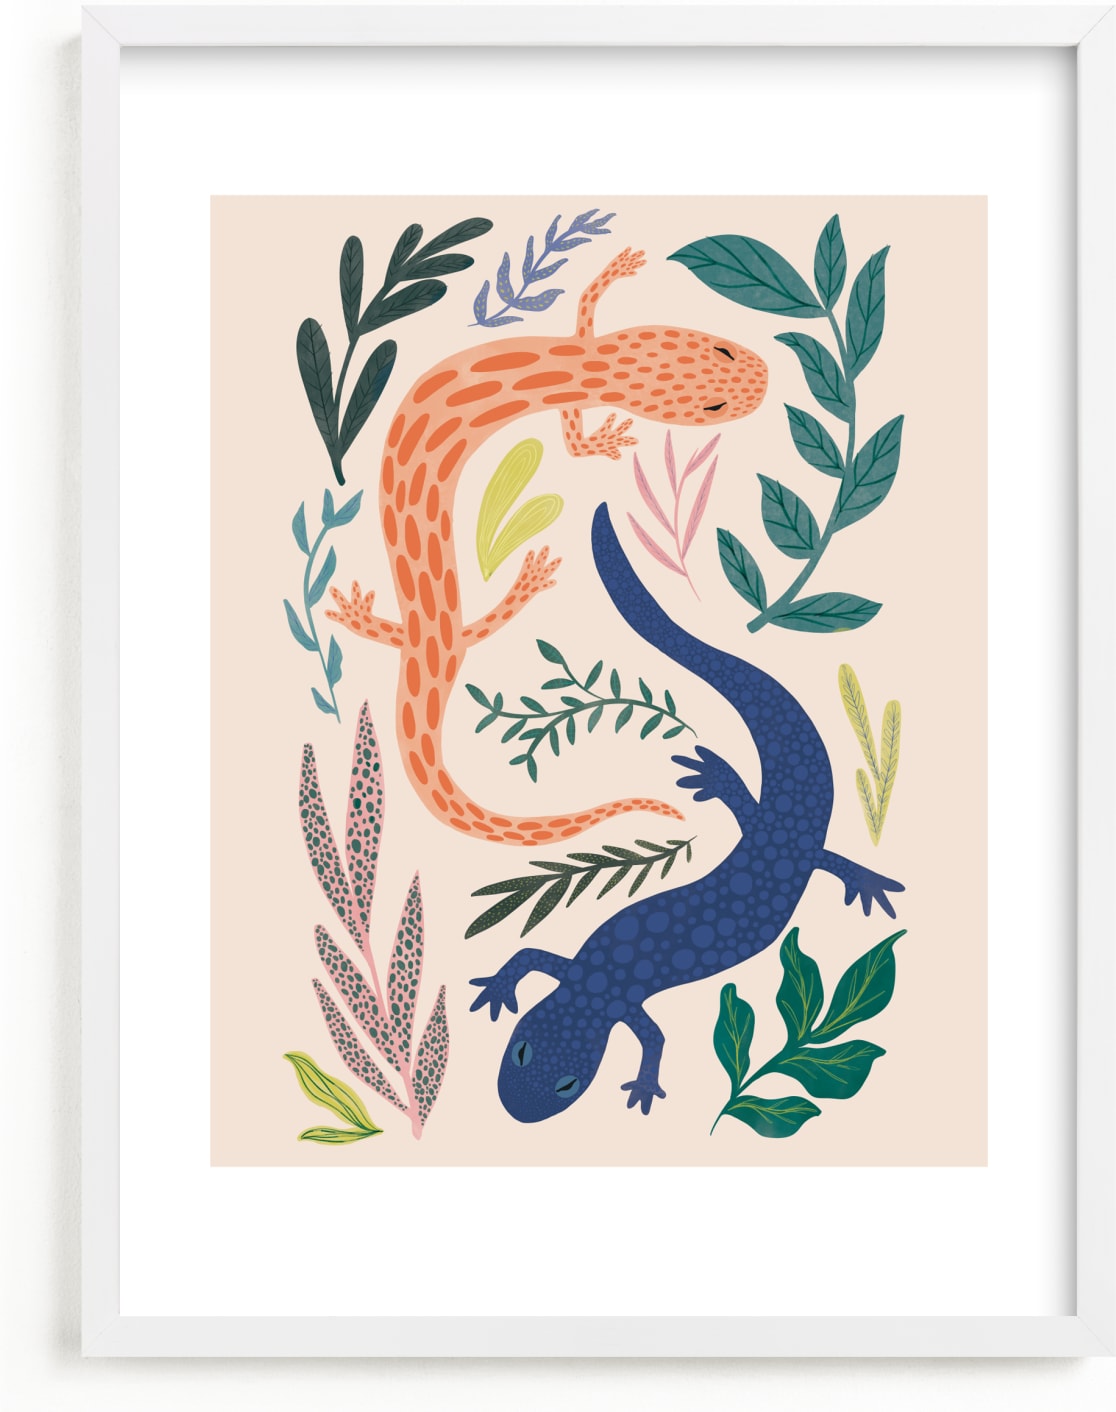 This is a colorful kids wall art by Megan Zang called Ever Changing.